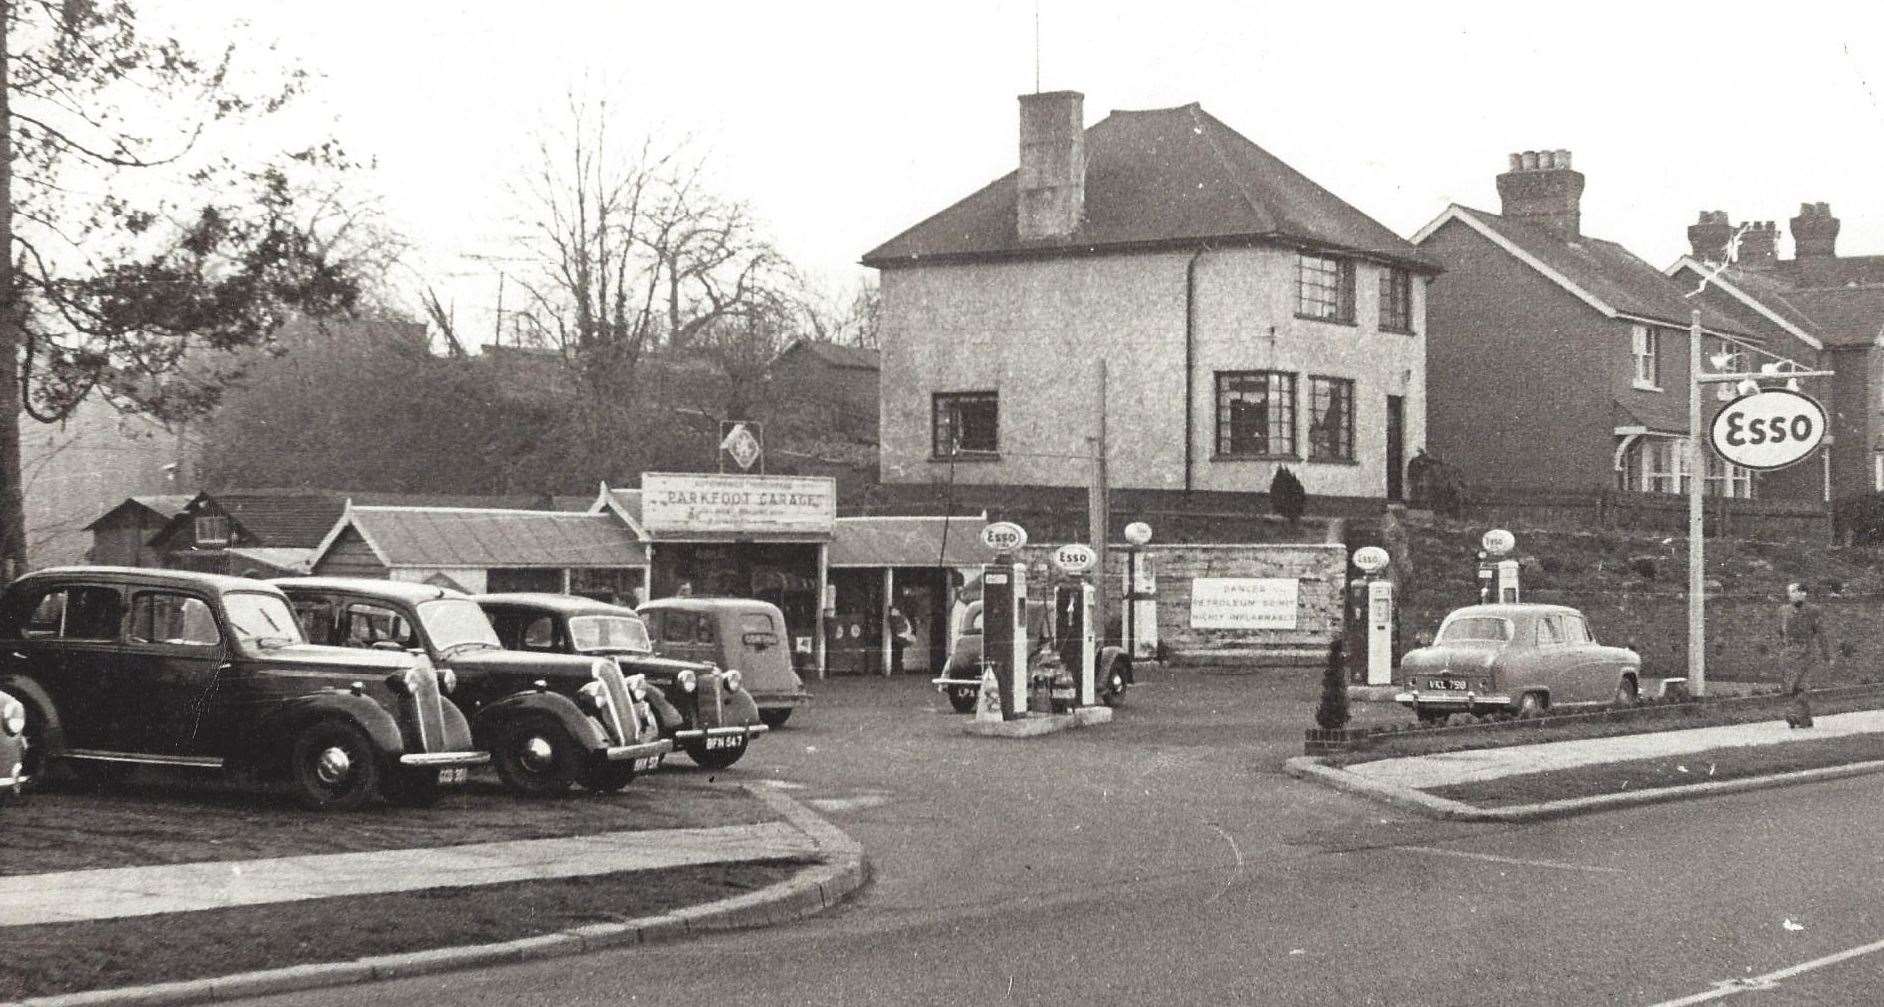 Parkfoot from the 1950s with the family home on the right